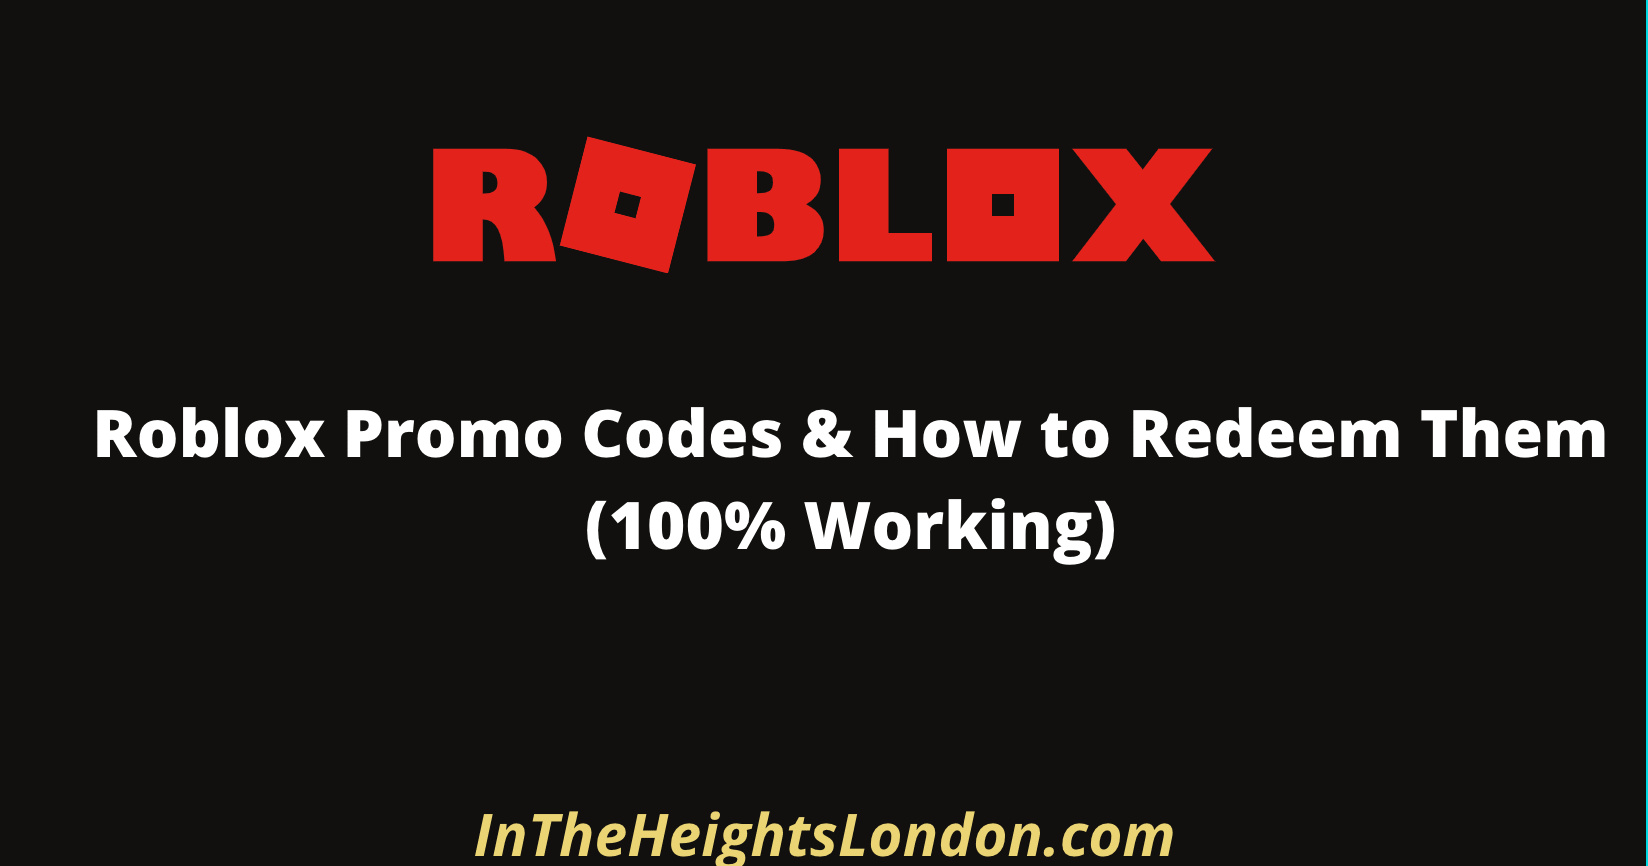 Roblox Promo Codes How To Redeem April 2021 - redeem roblox promotional code